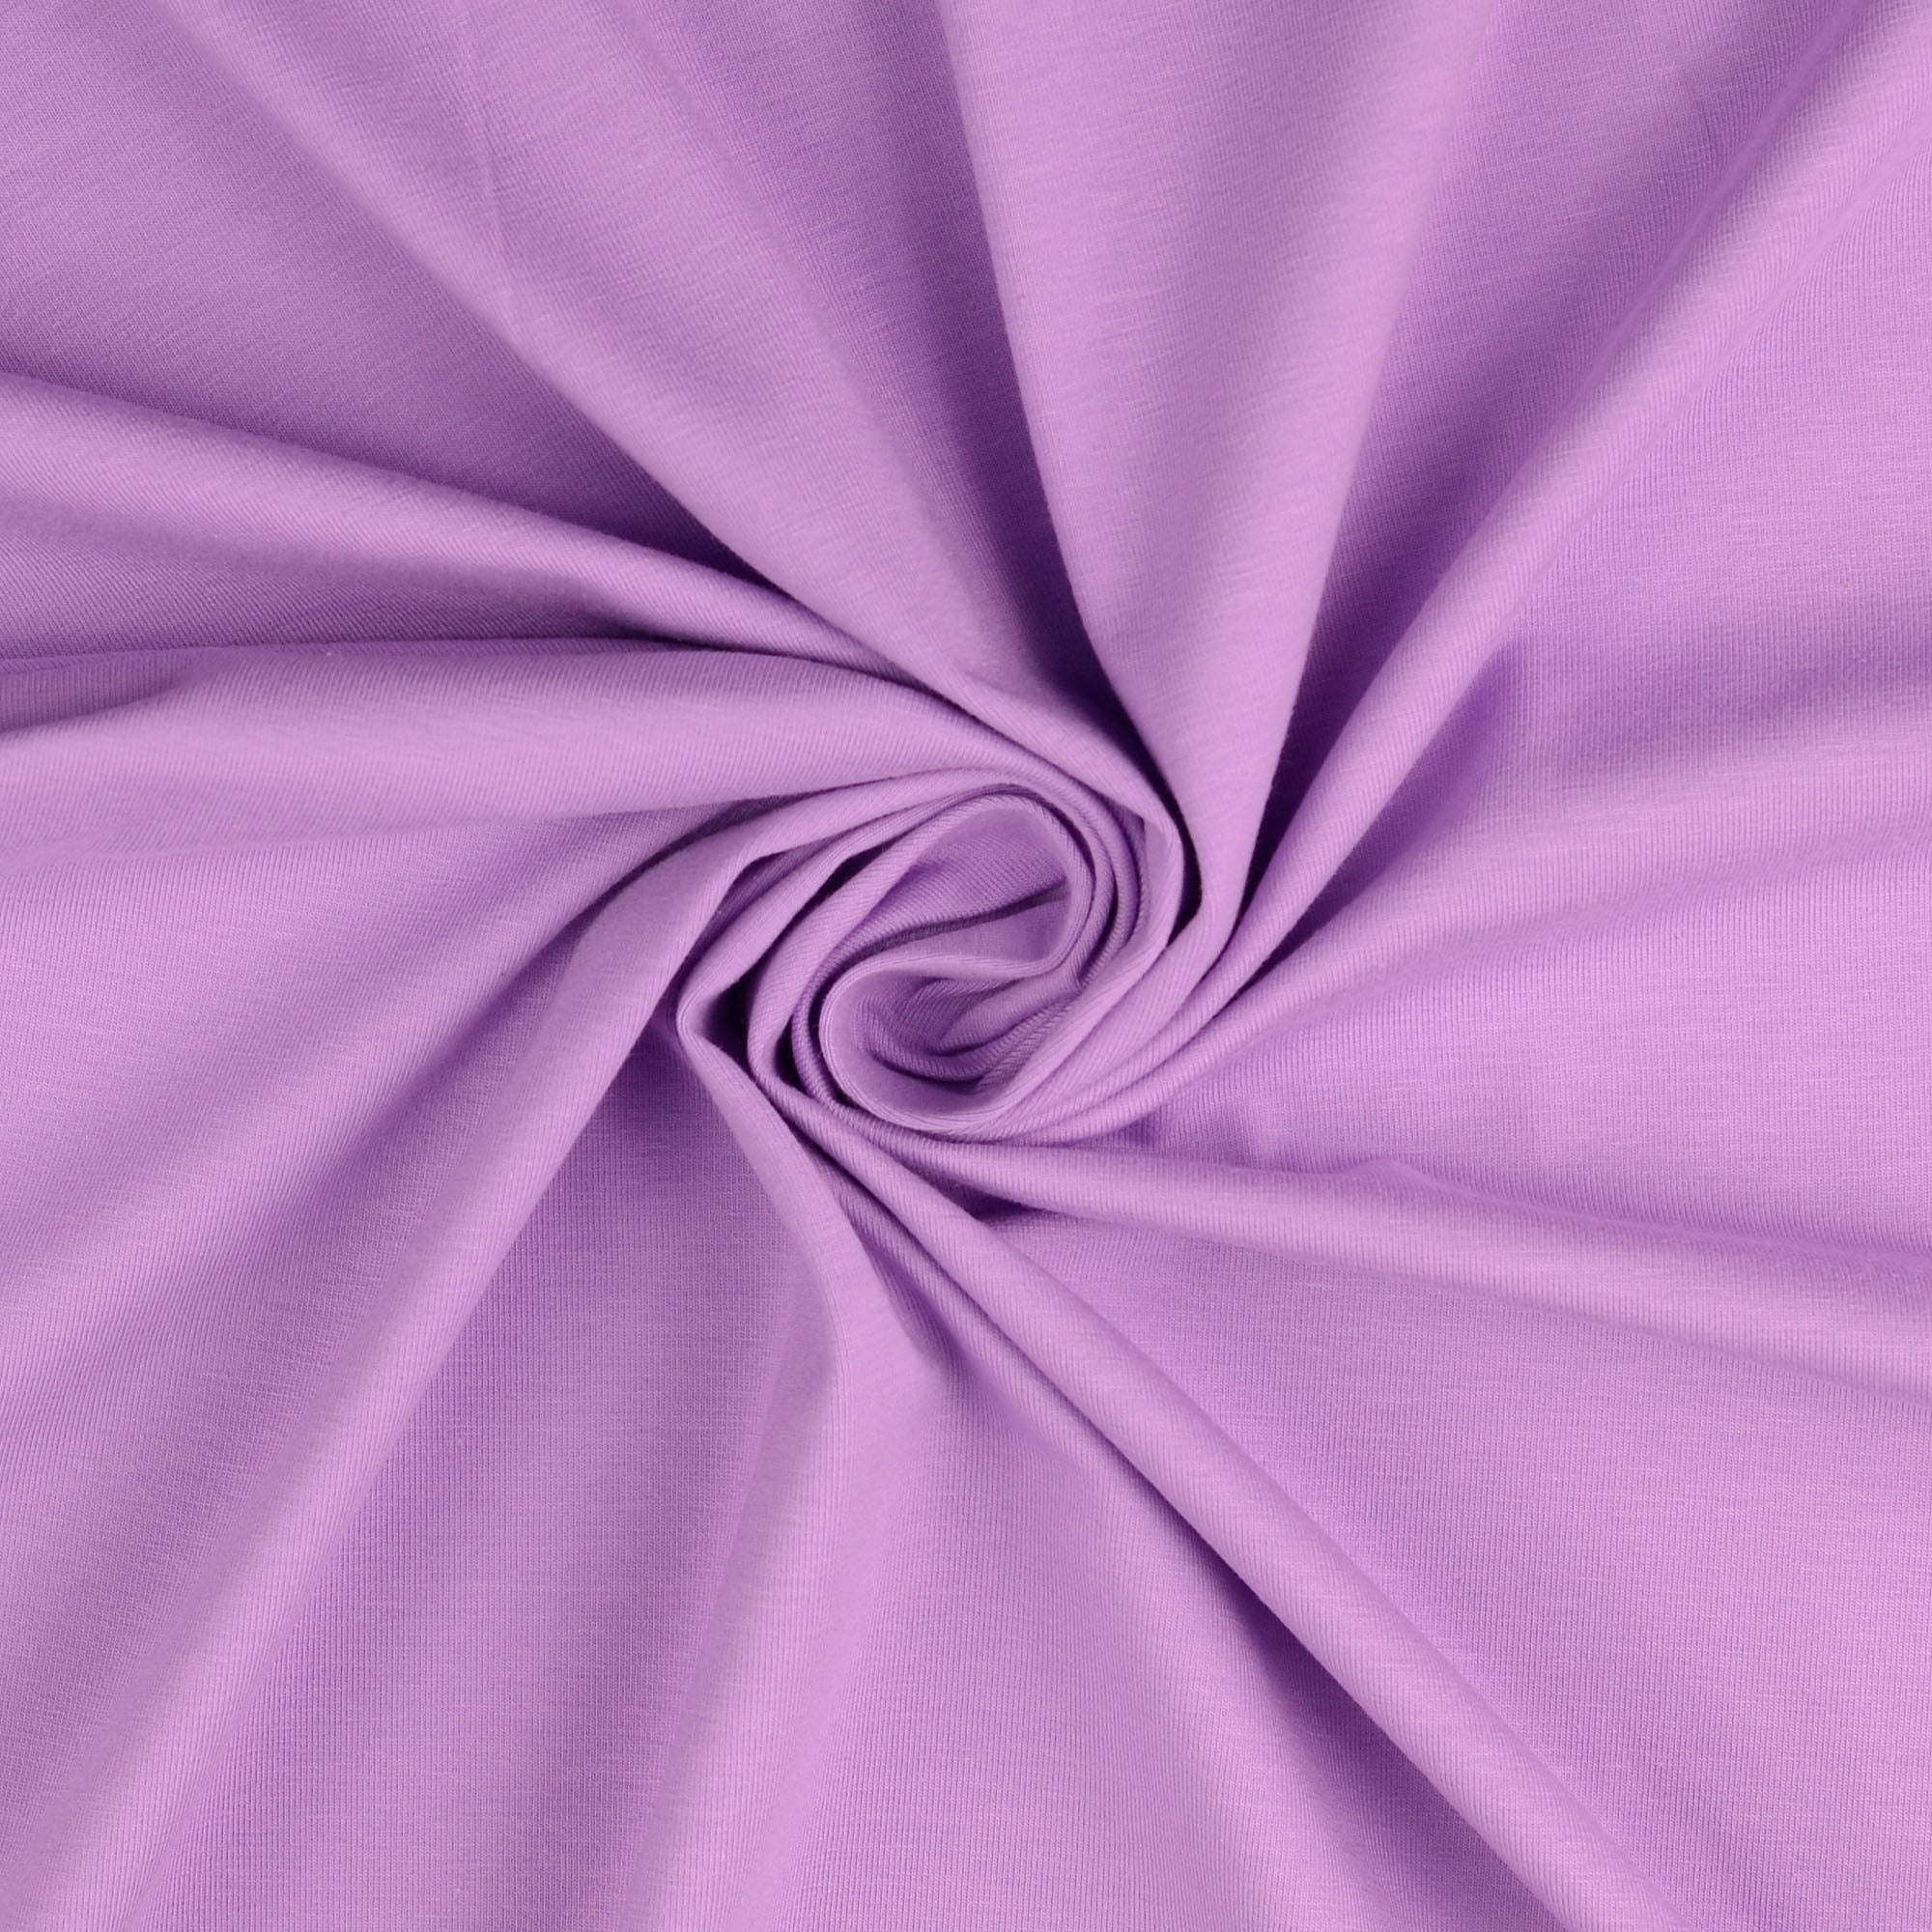 Essential Chic Lilac Plain Cotton Jersey Fabric